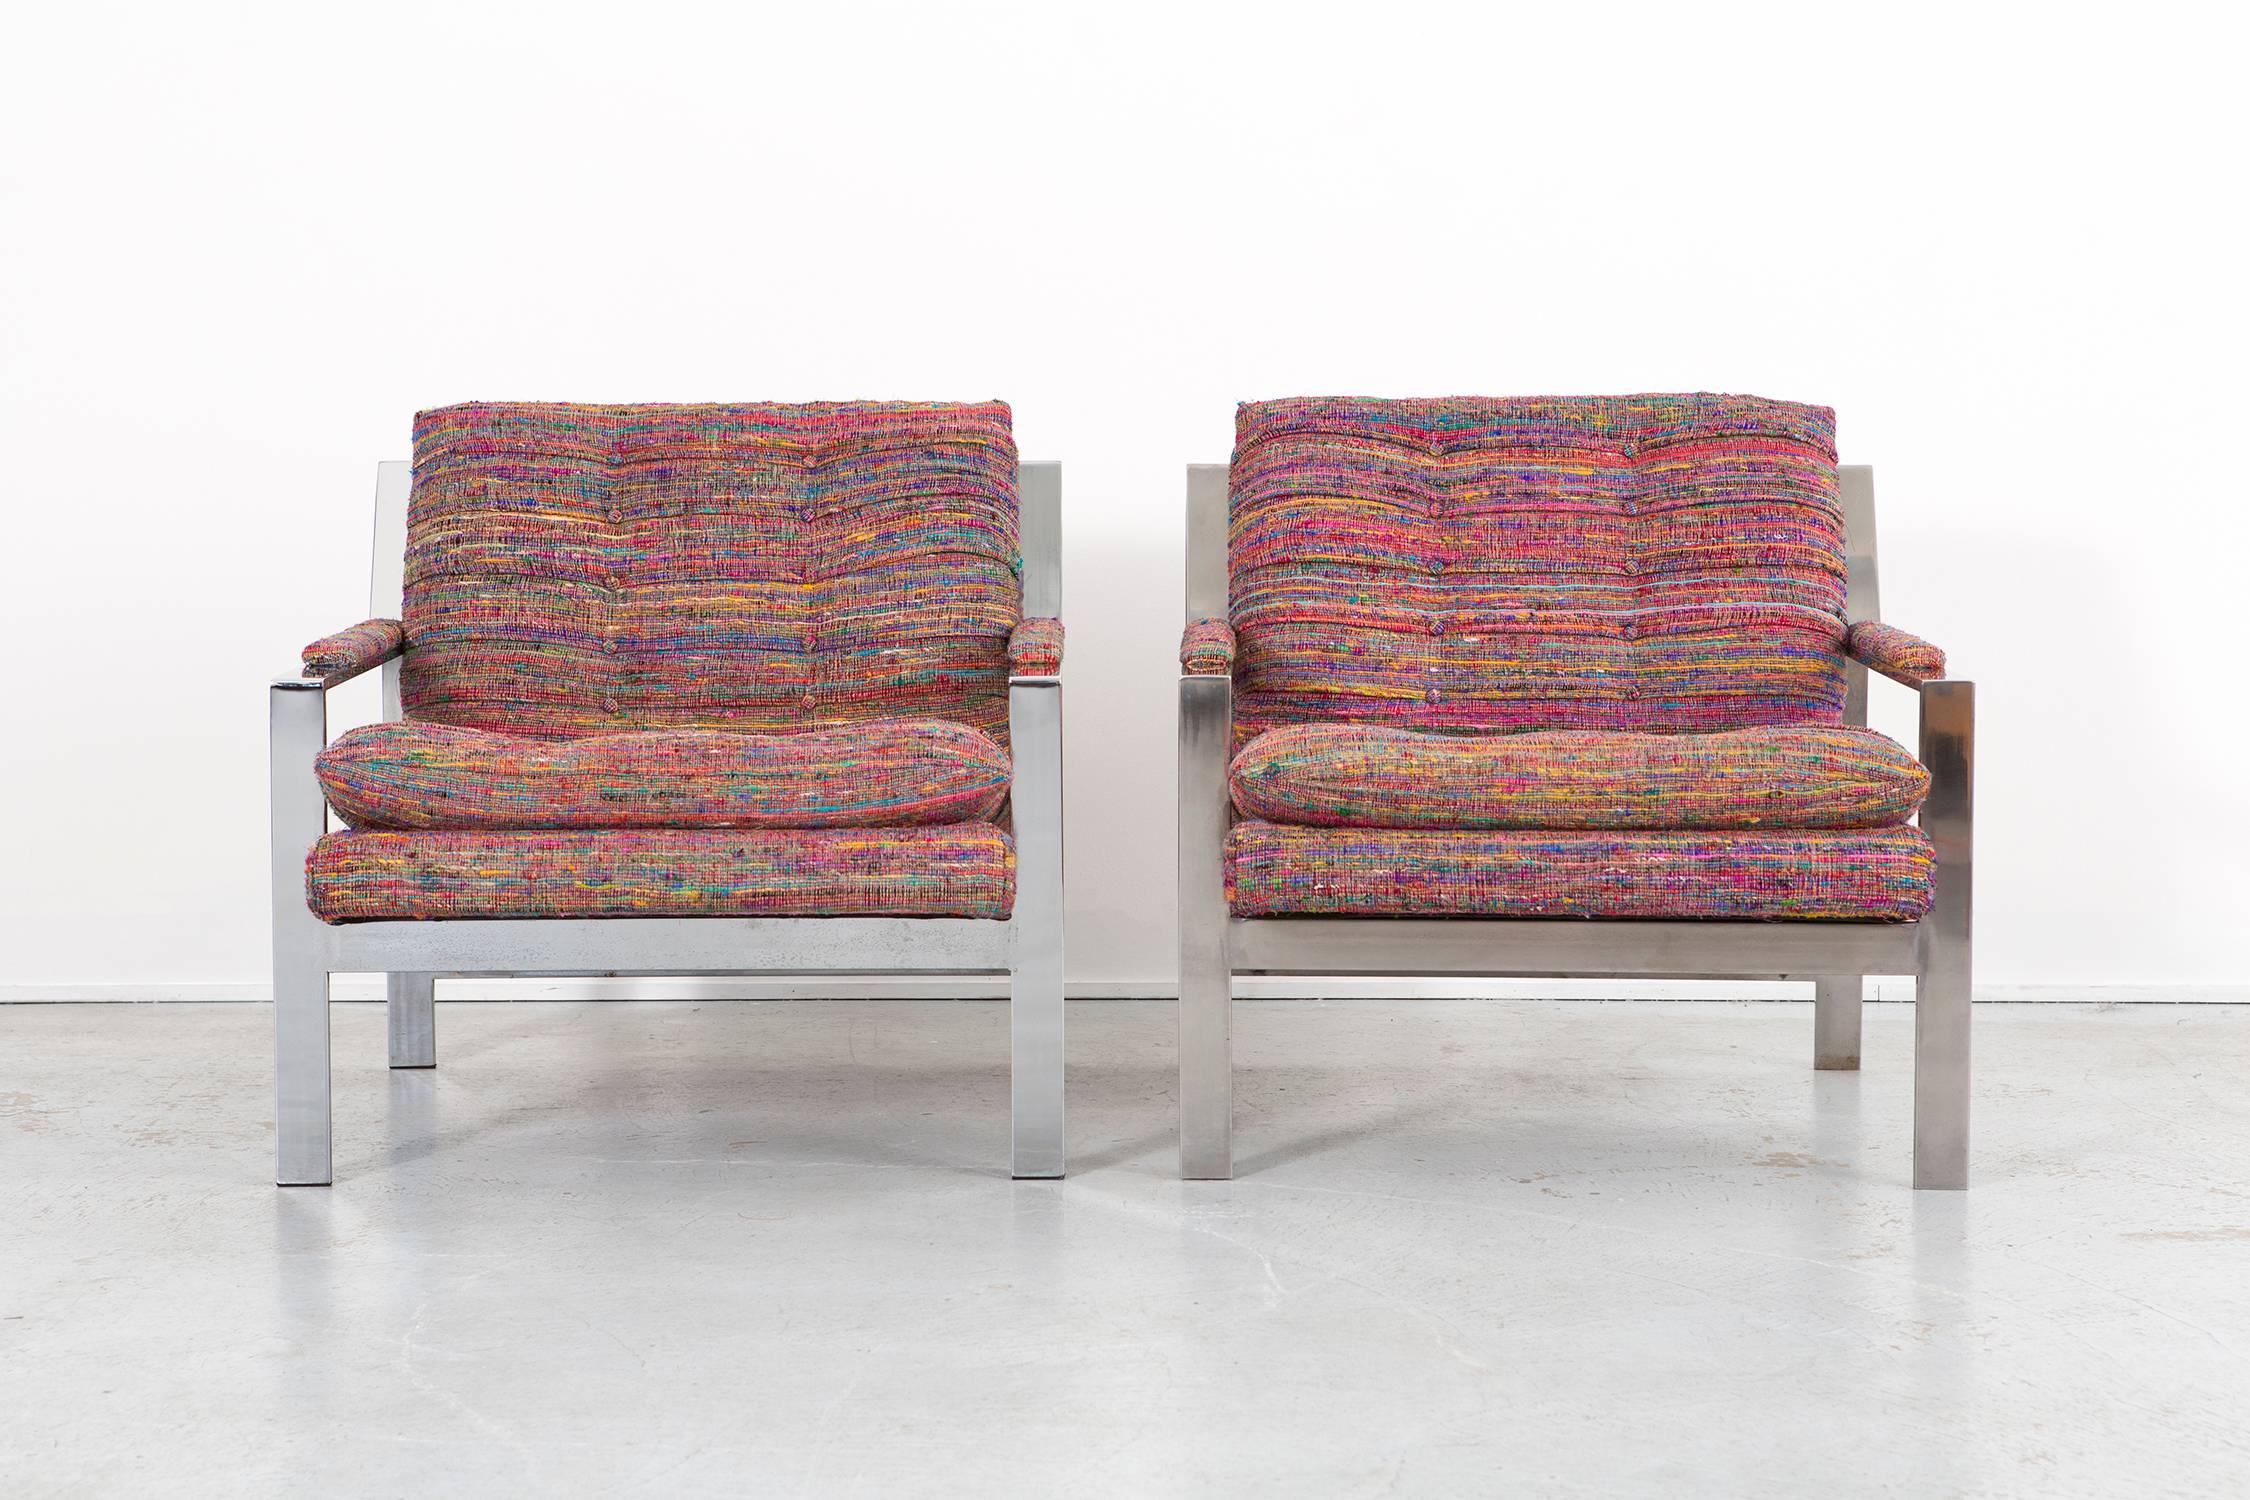 Flat bar lounge chairs

Designed by Cy Mann

USA, circa 1970s

Reupholstered natural cotton weave blend (85% silk + 15% cotton)

Measures: 29 ¼” H x 29 7/16” W x 31 ¾” D x seat 21 ¼” H

Sold as a set

Fabric sample can be provided upon request